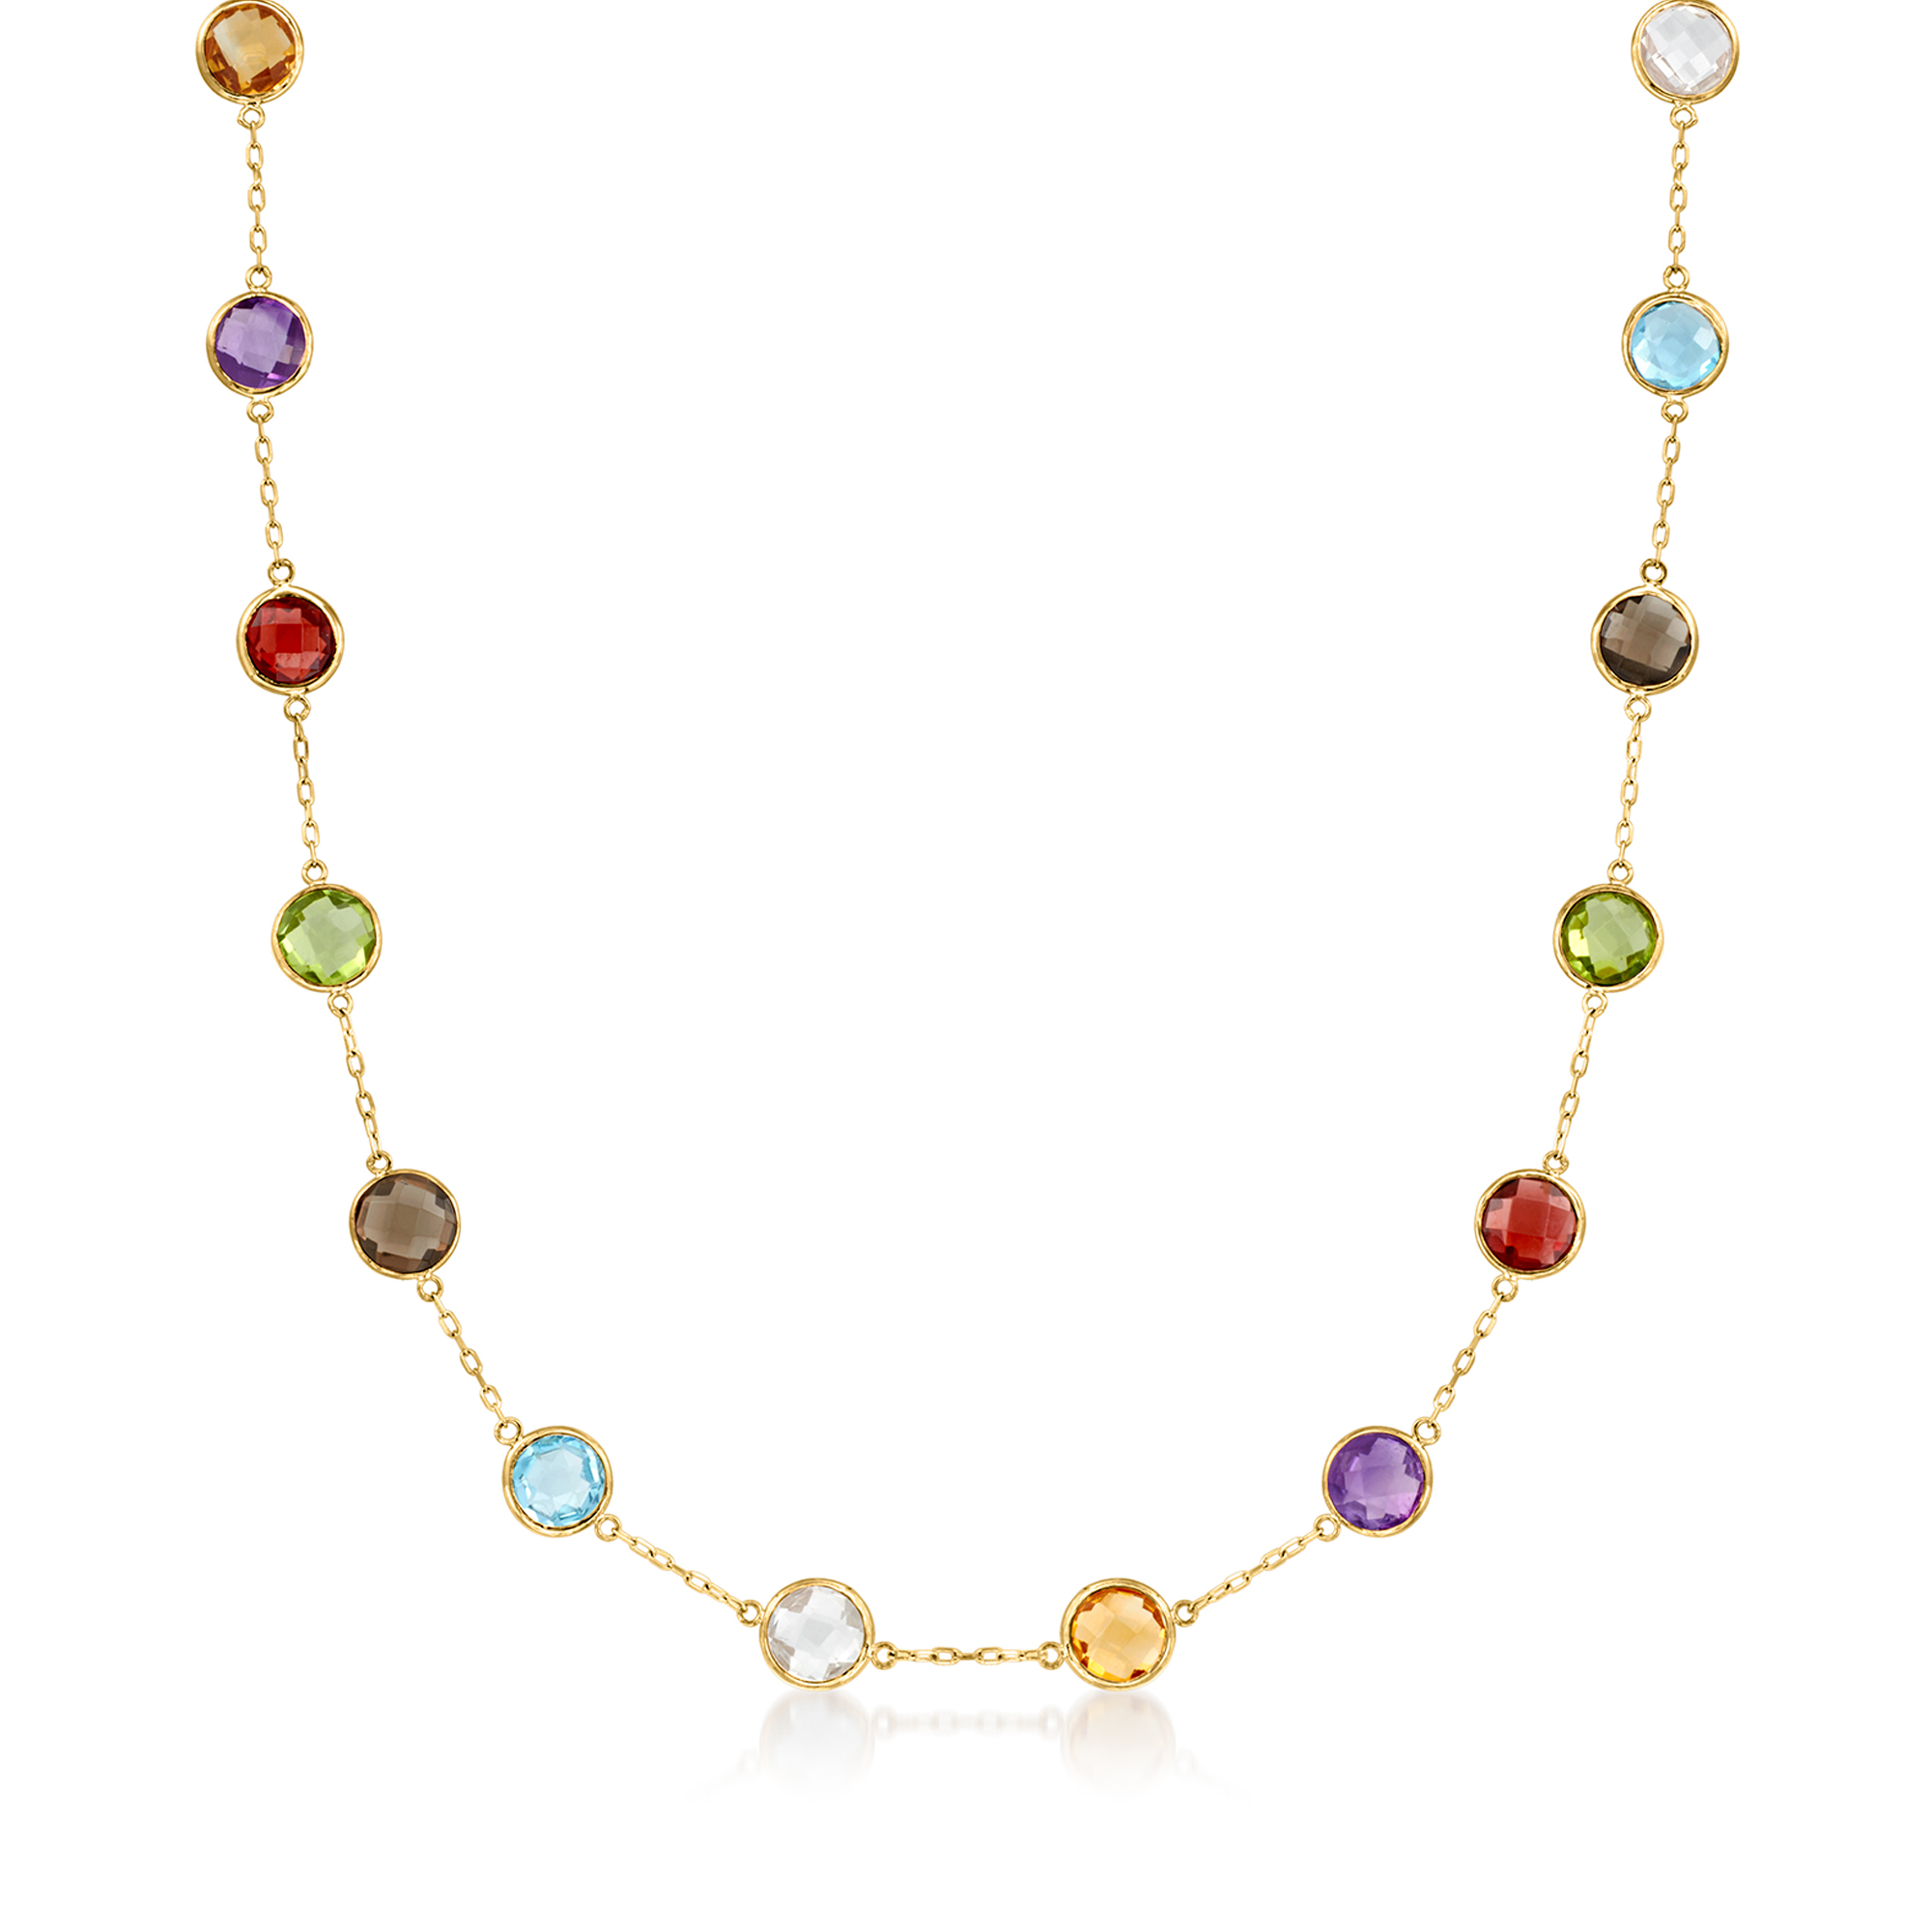 Gemdrop Five Stone Necklace - Element 79 Contemporary Jewelry